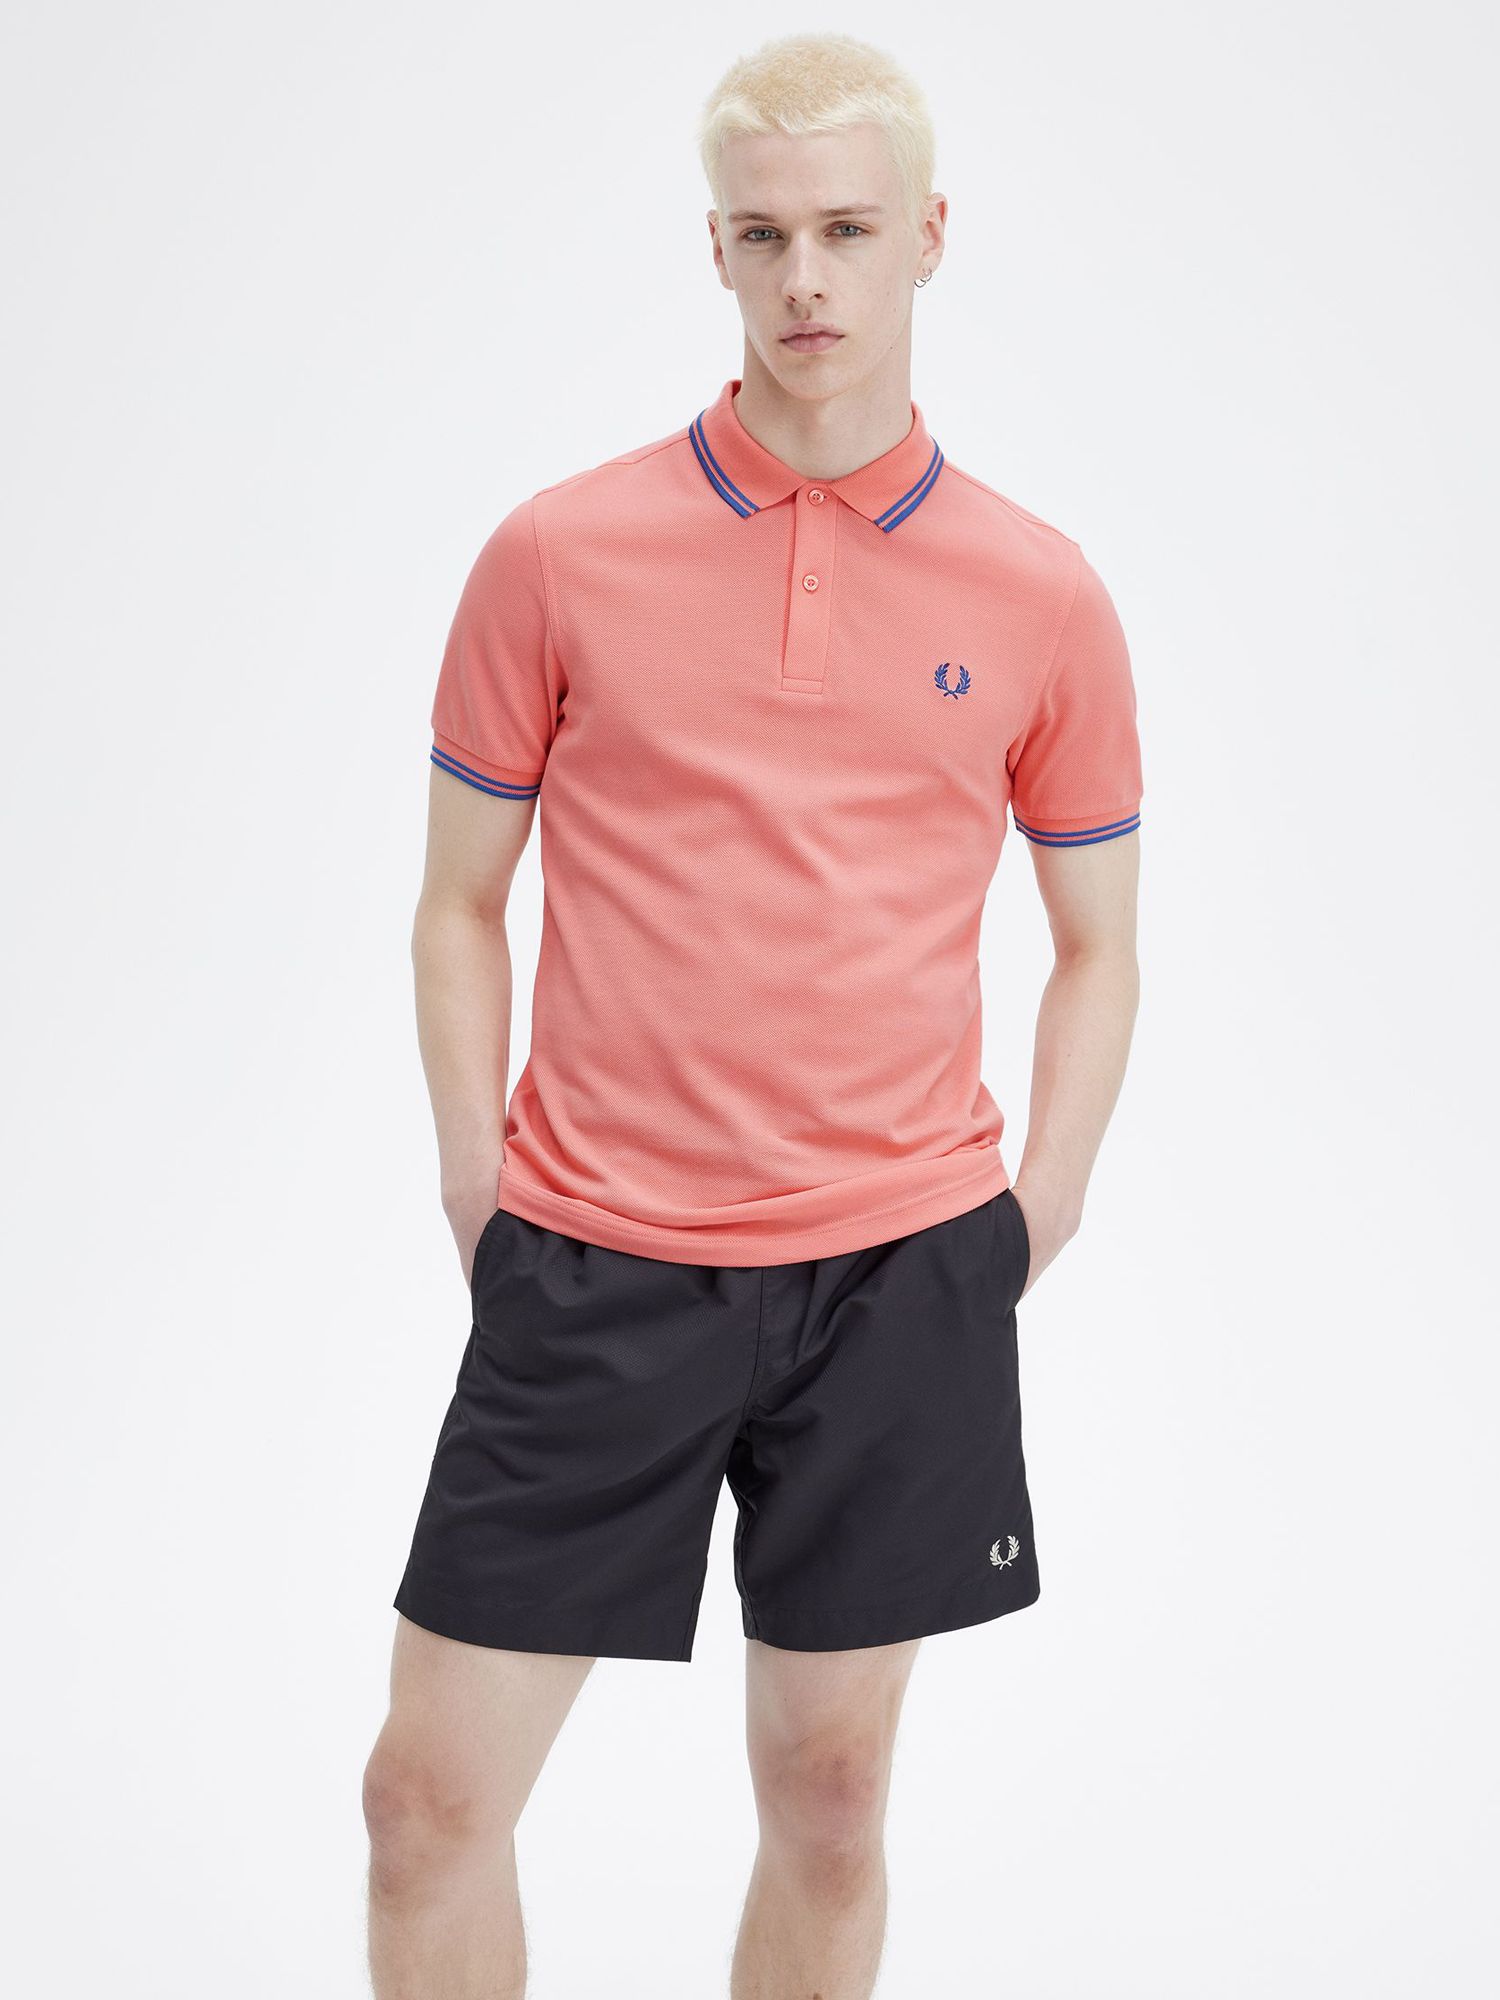 Fred Perry The Twin Tipped Short Sleeve T-Shirt, V28 Crlheat/Shdcobal, S